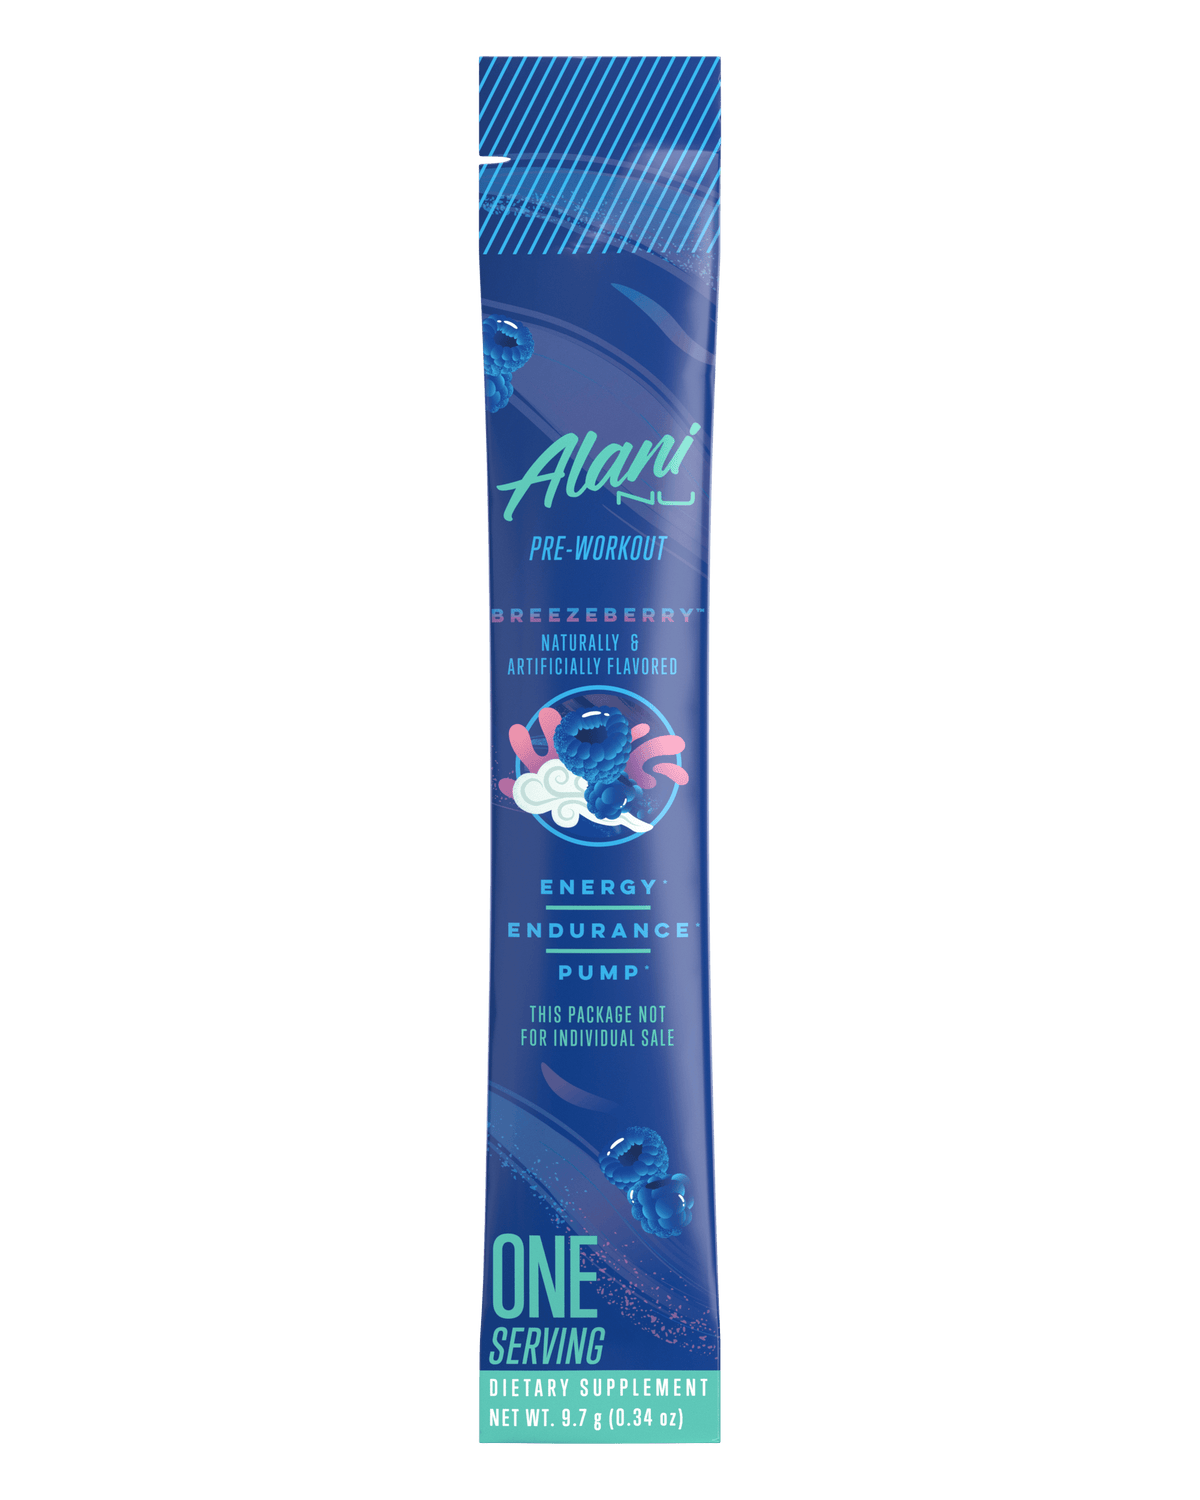 A Pre-Workout Sample Stick in Breezeberry flavor.